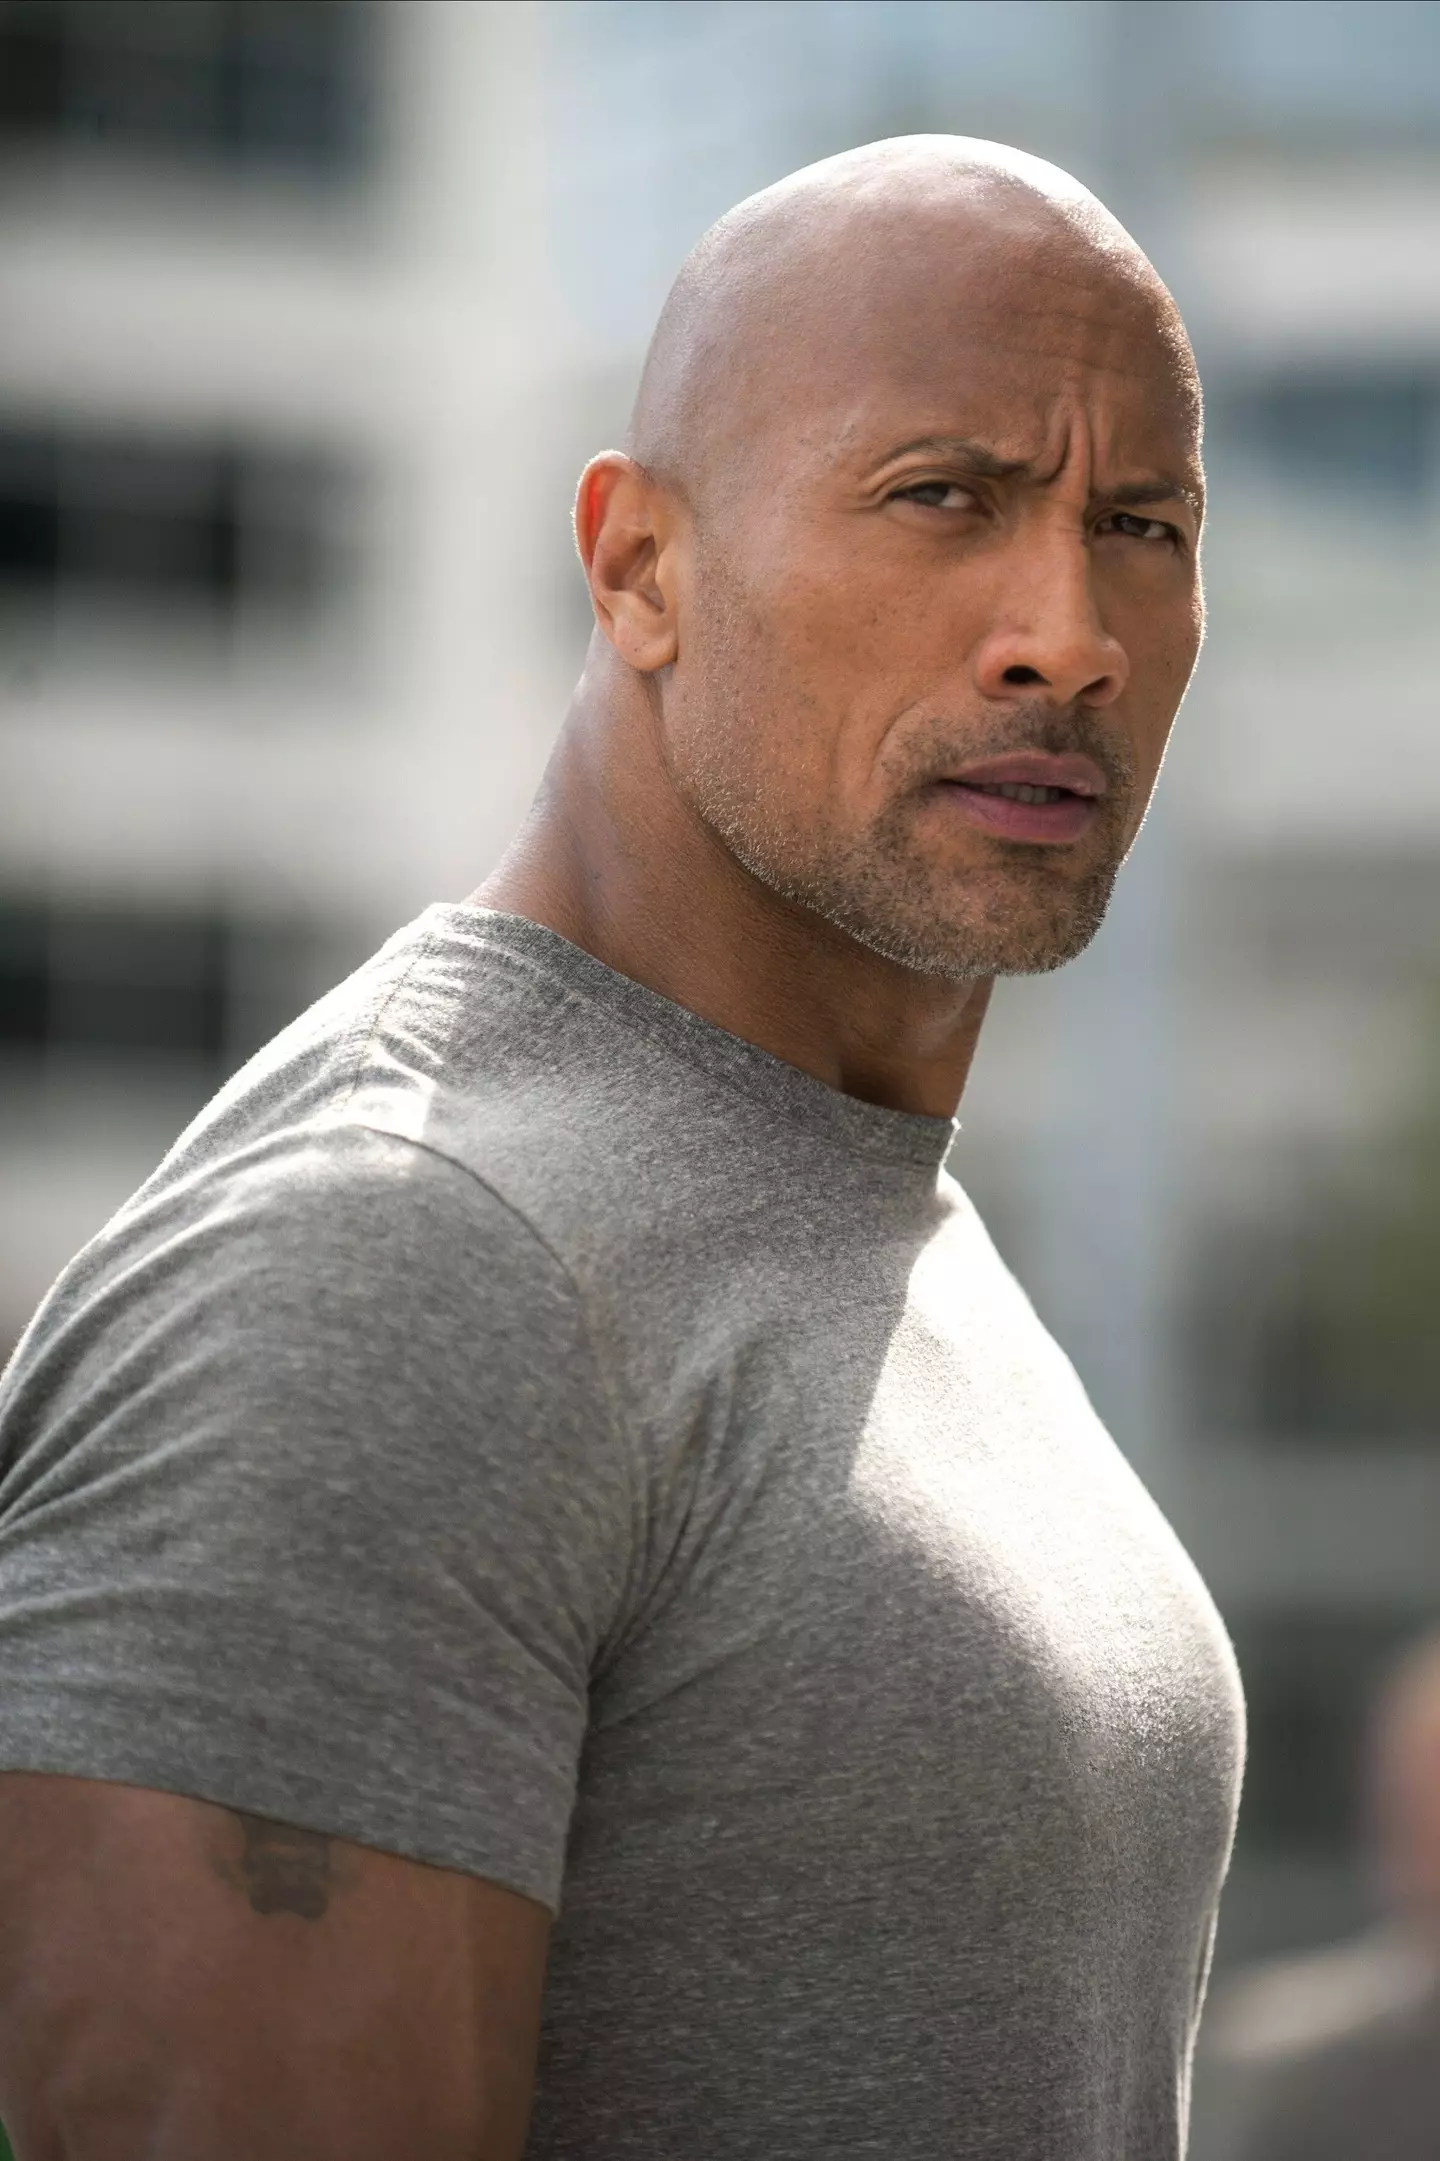 Dwayne Johnson apparently underwent surgery for his man boobs.